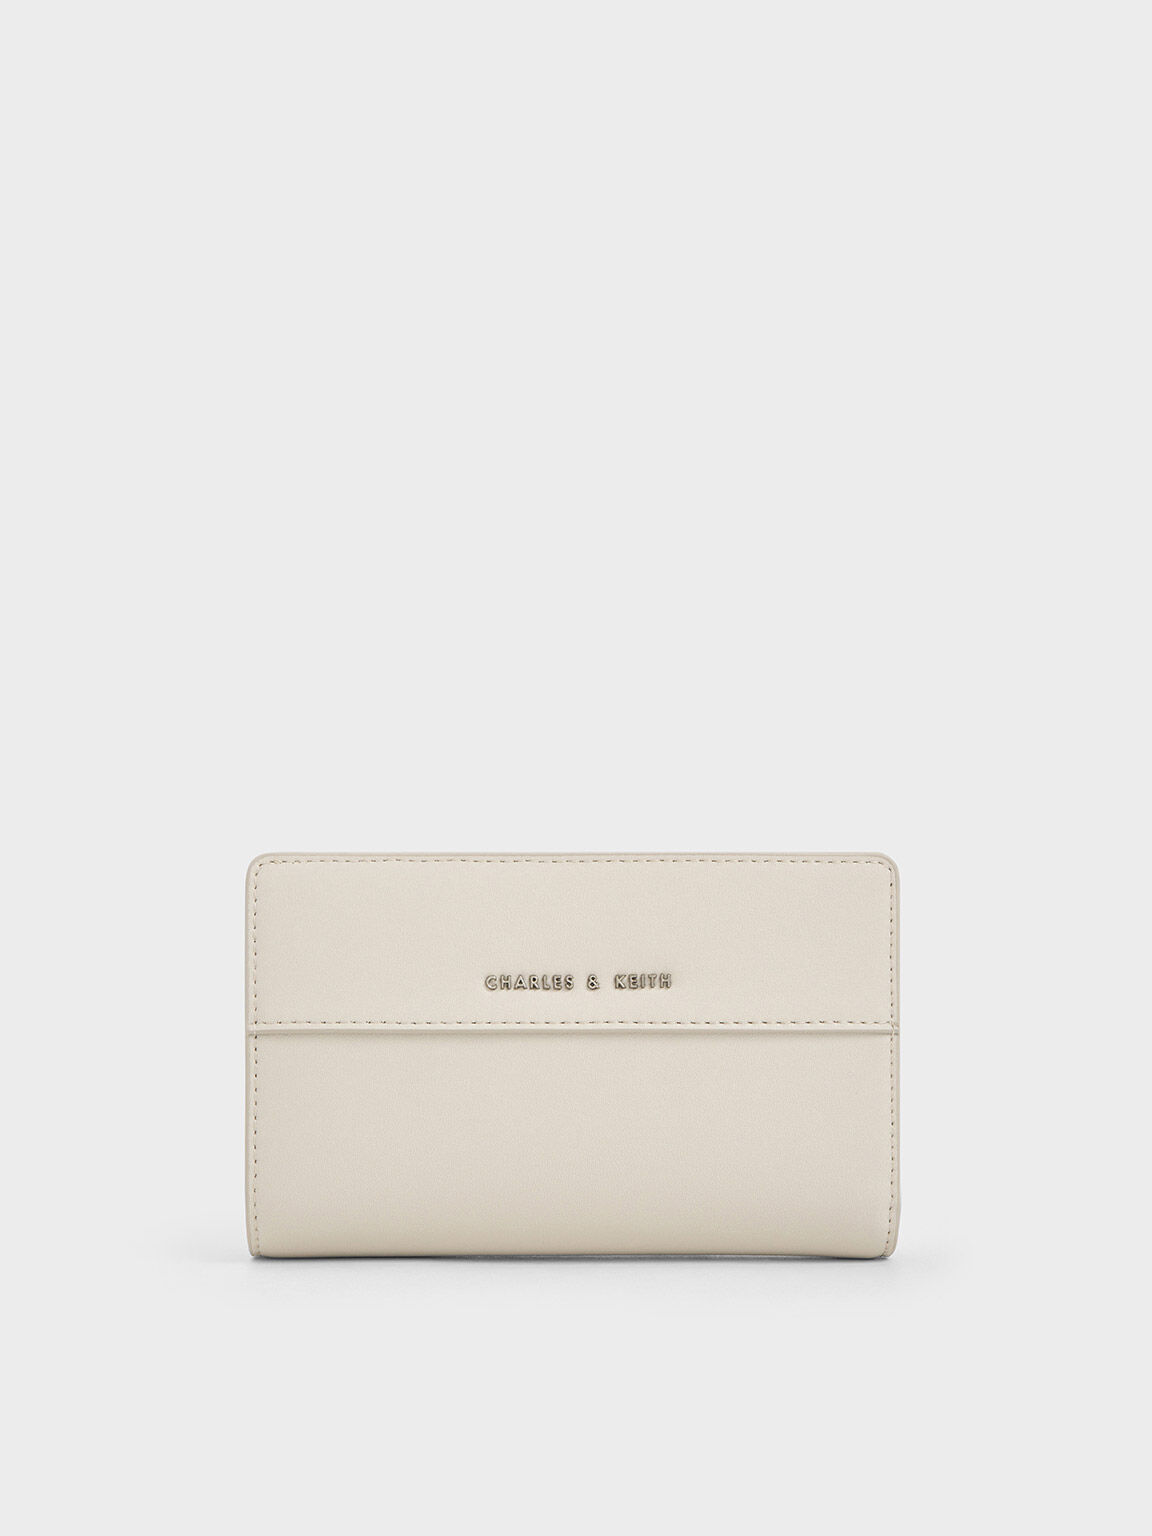 Grey Wallets for Women | Shop Online | CHARLES & KEITH US